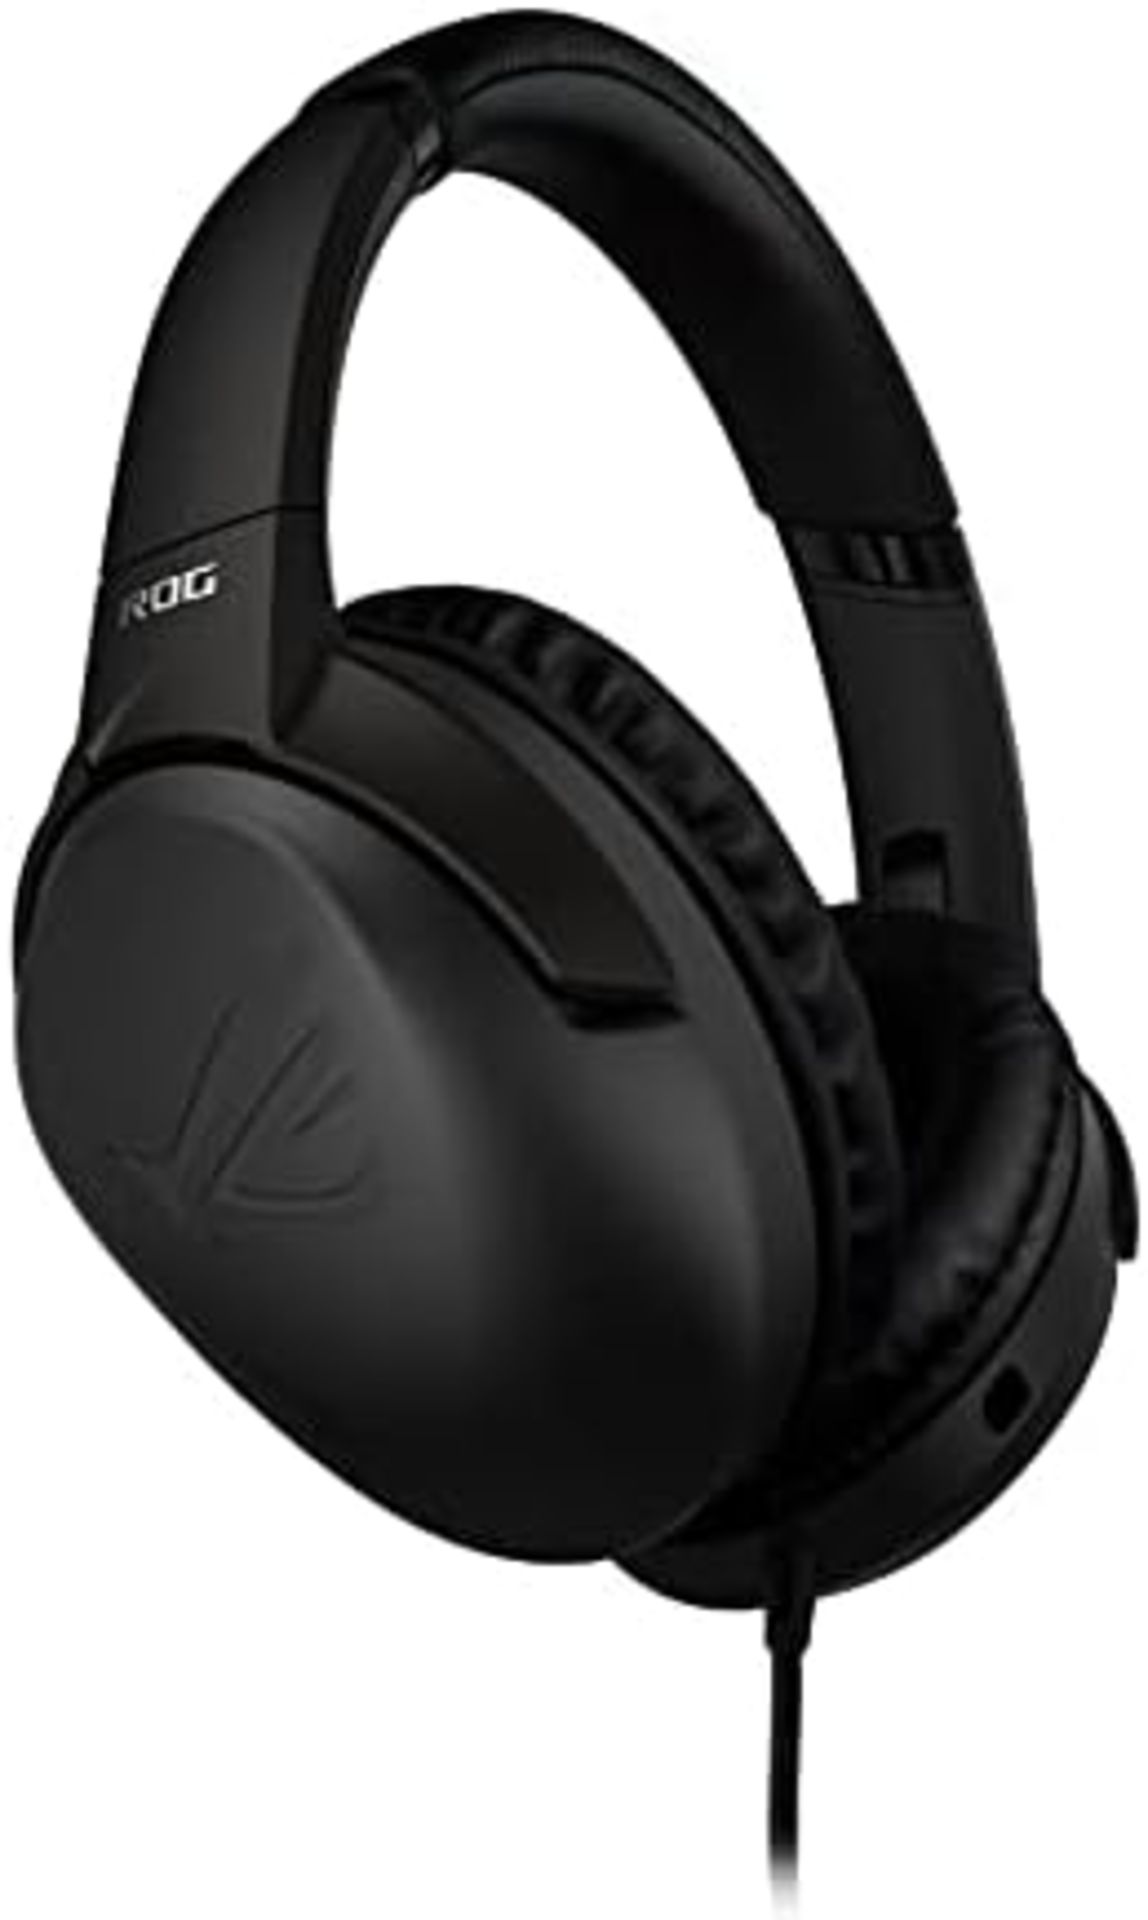 BRAND NEW FACTORY SEALED ASUS ROG Strix Go Core Gaming Headset. RRP £79.99. Exclusive airtight - Image 2 of 5